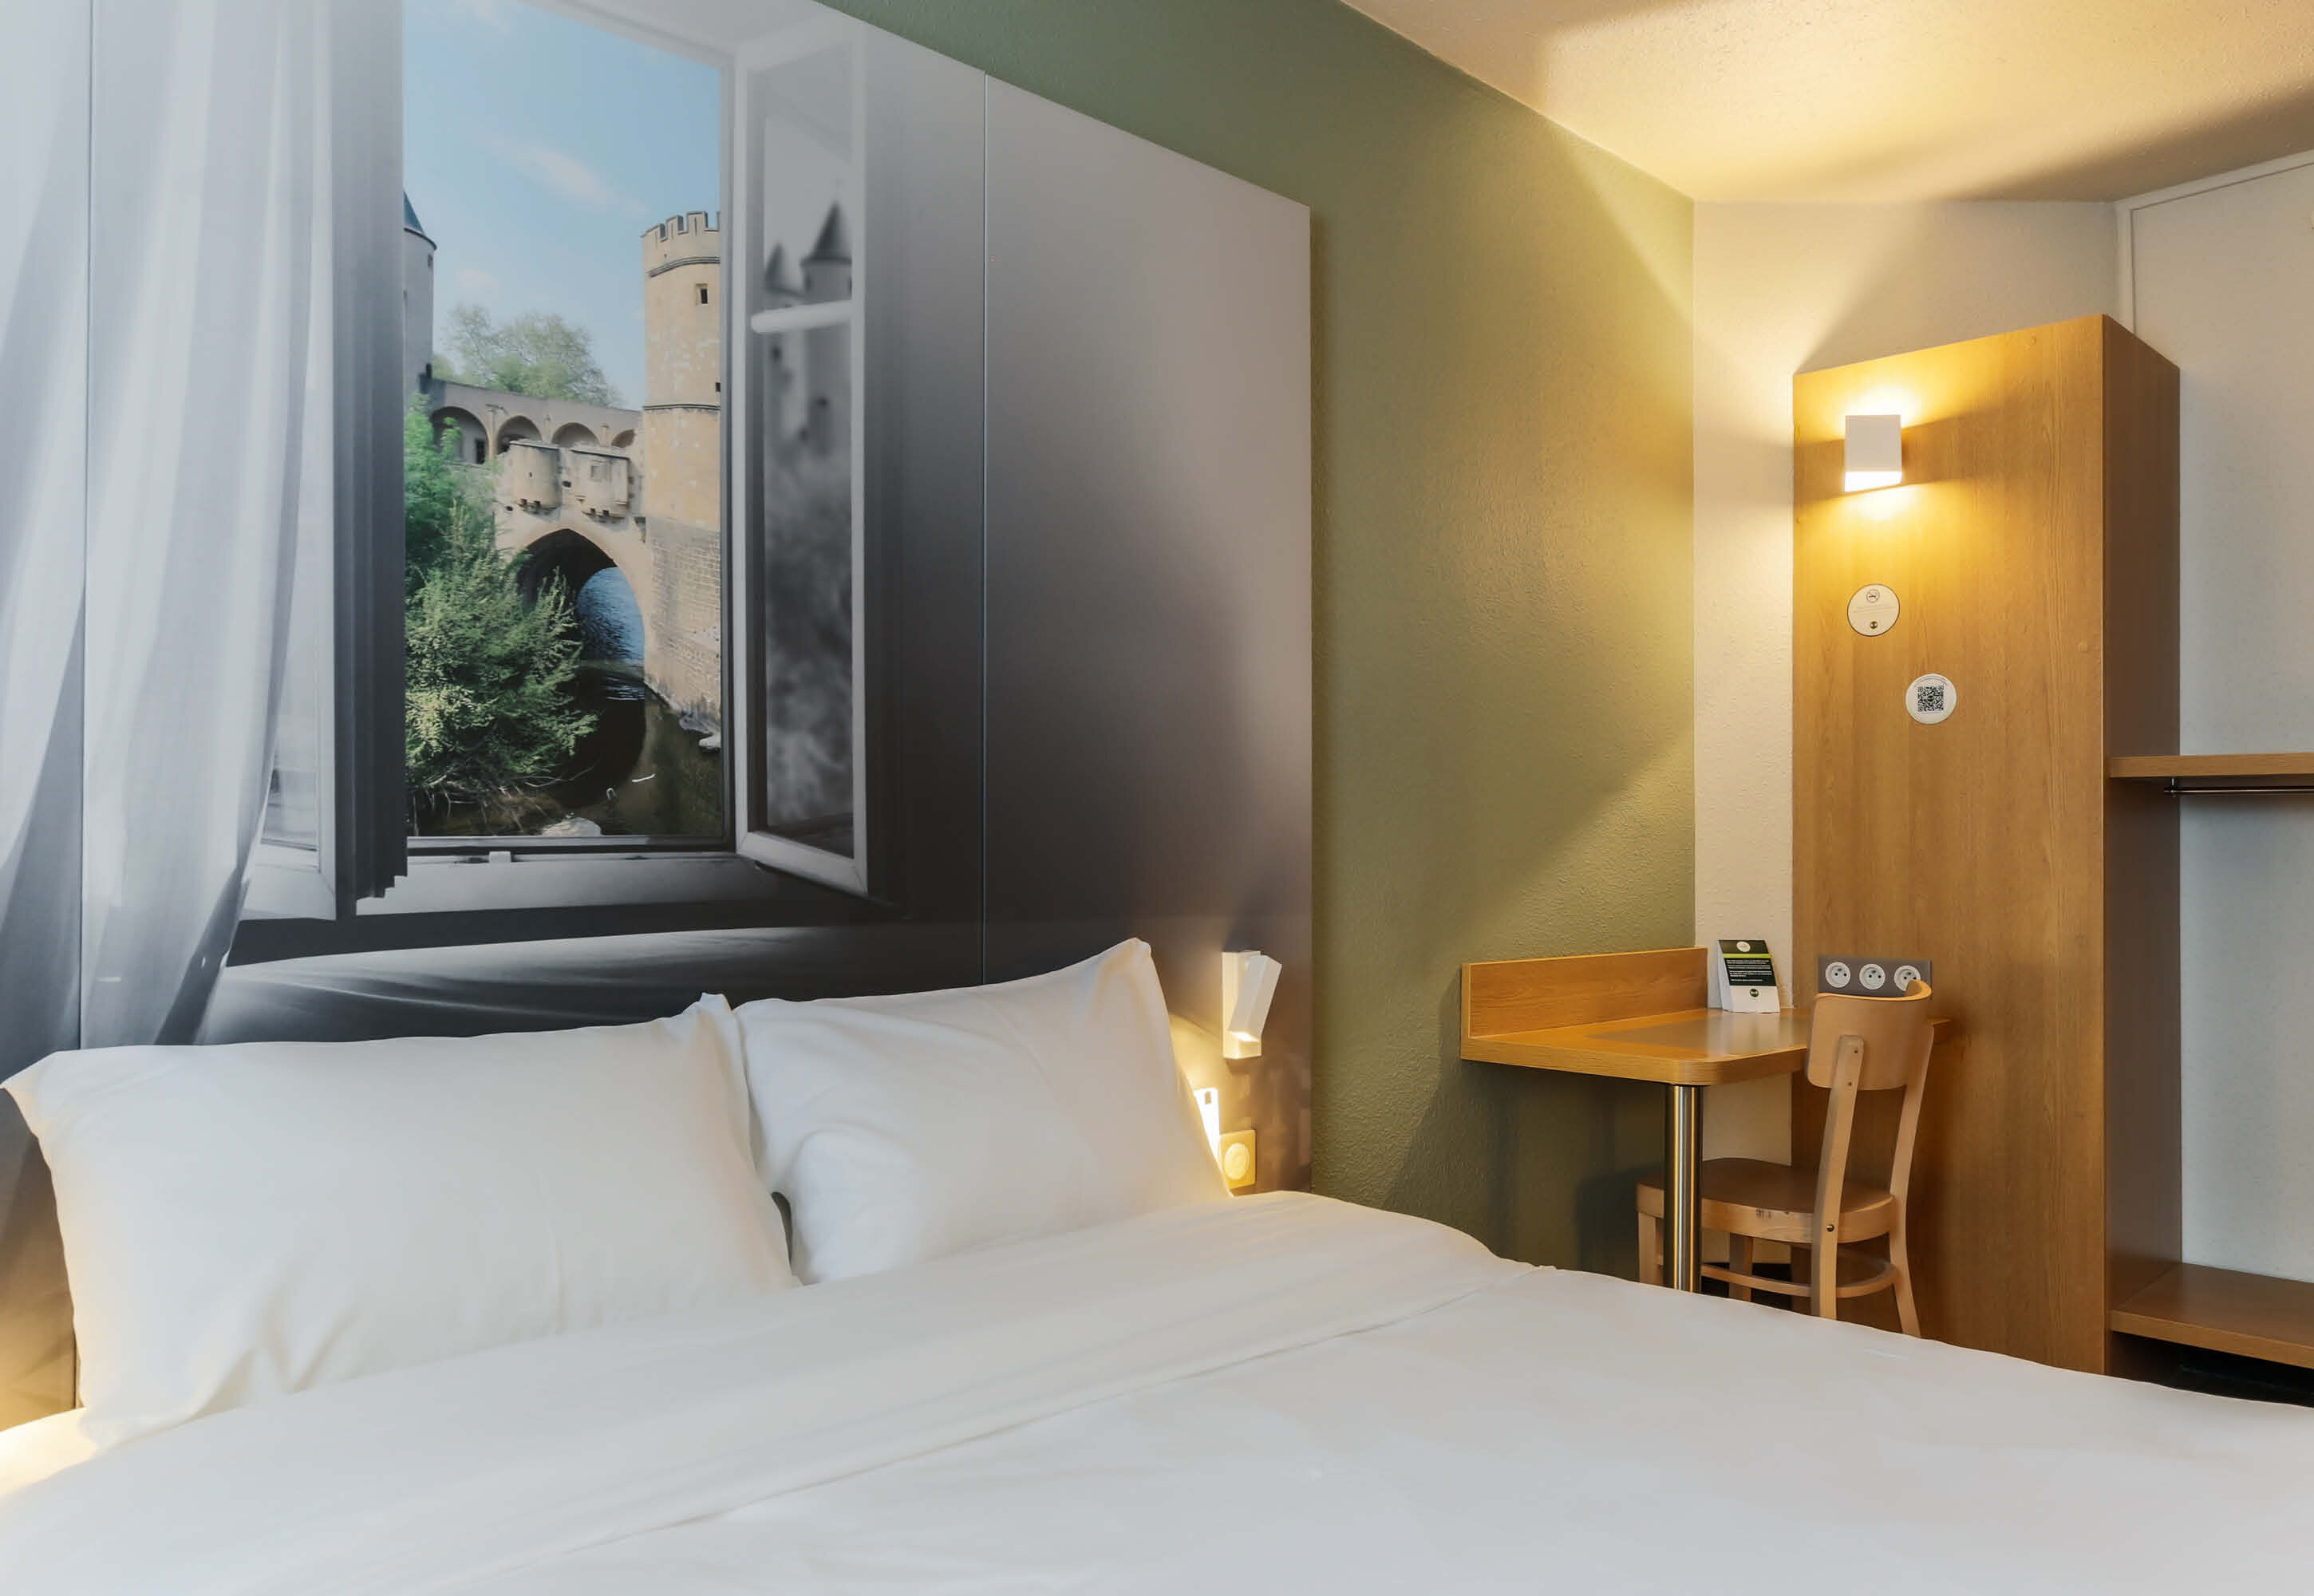 Images B&B HOTEL Metz Jouy-aux-Arches